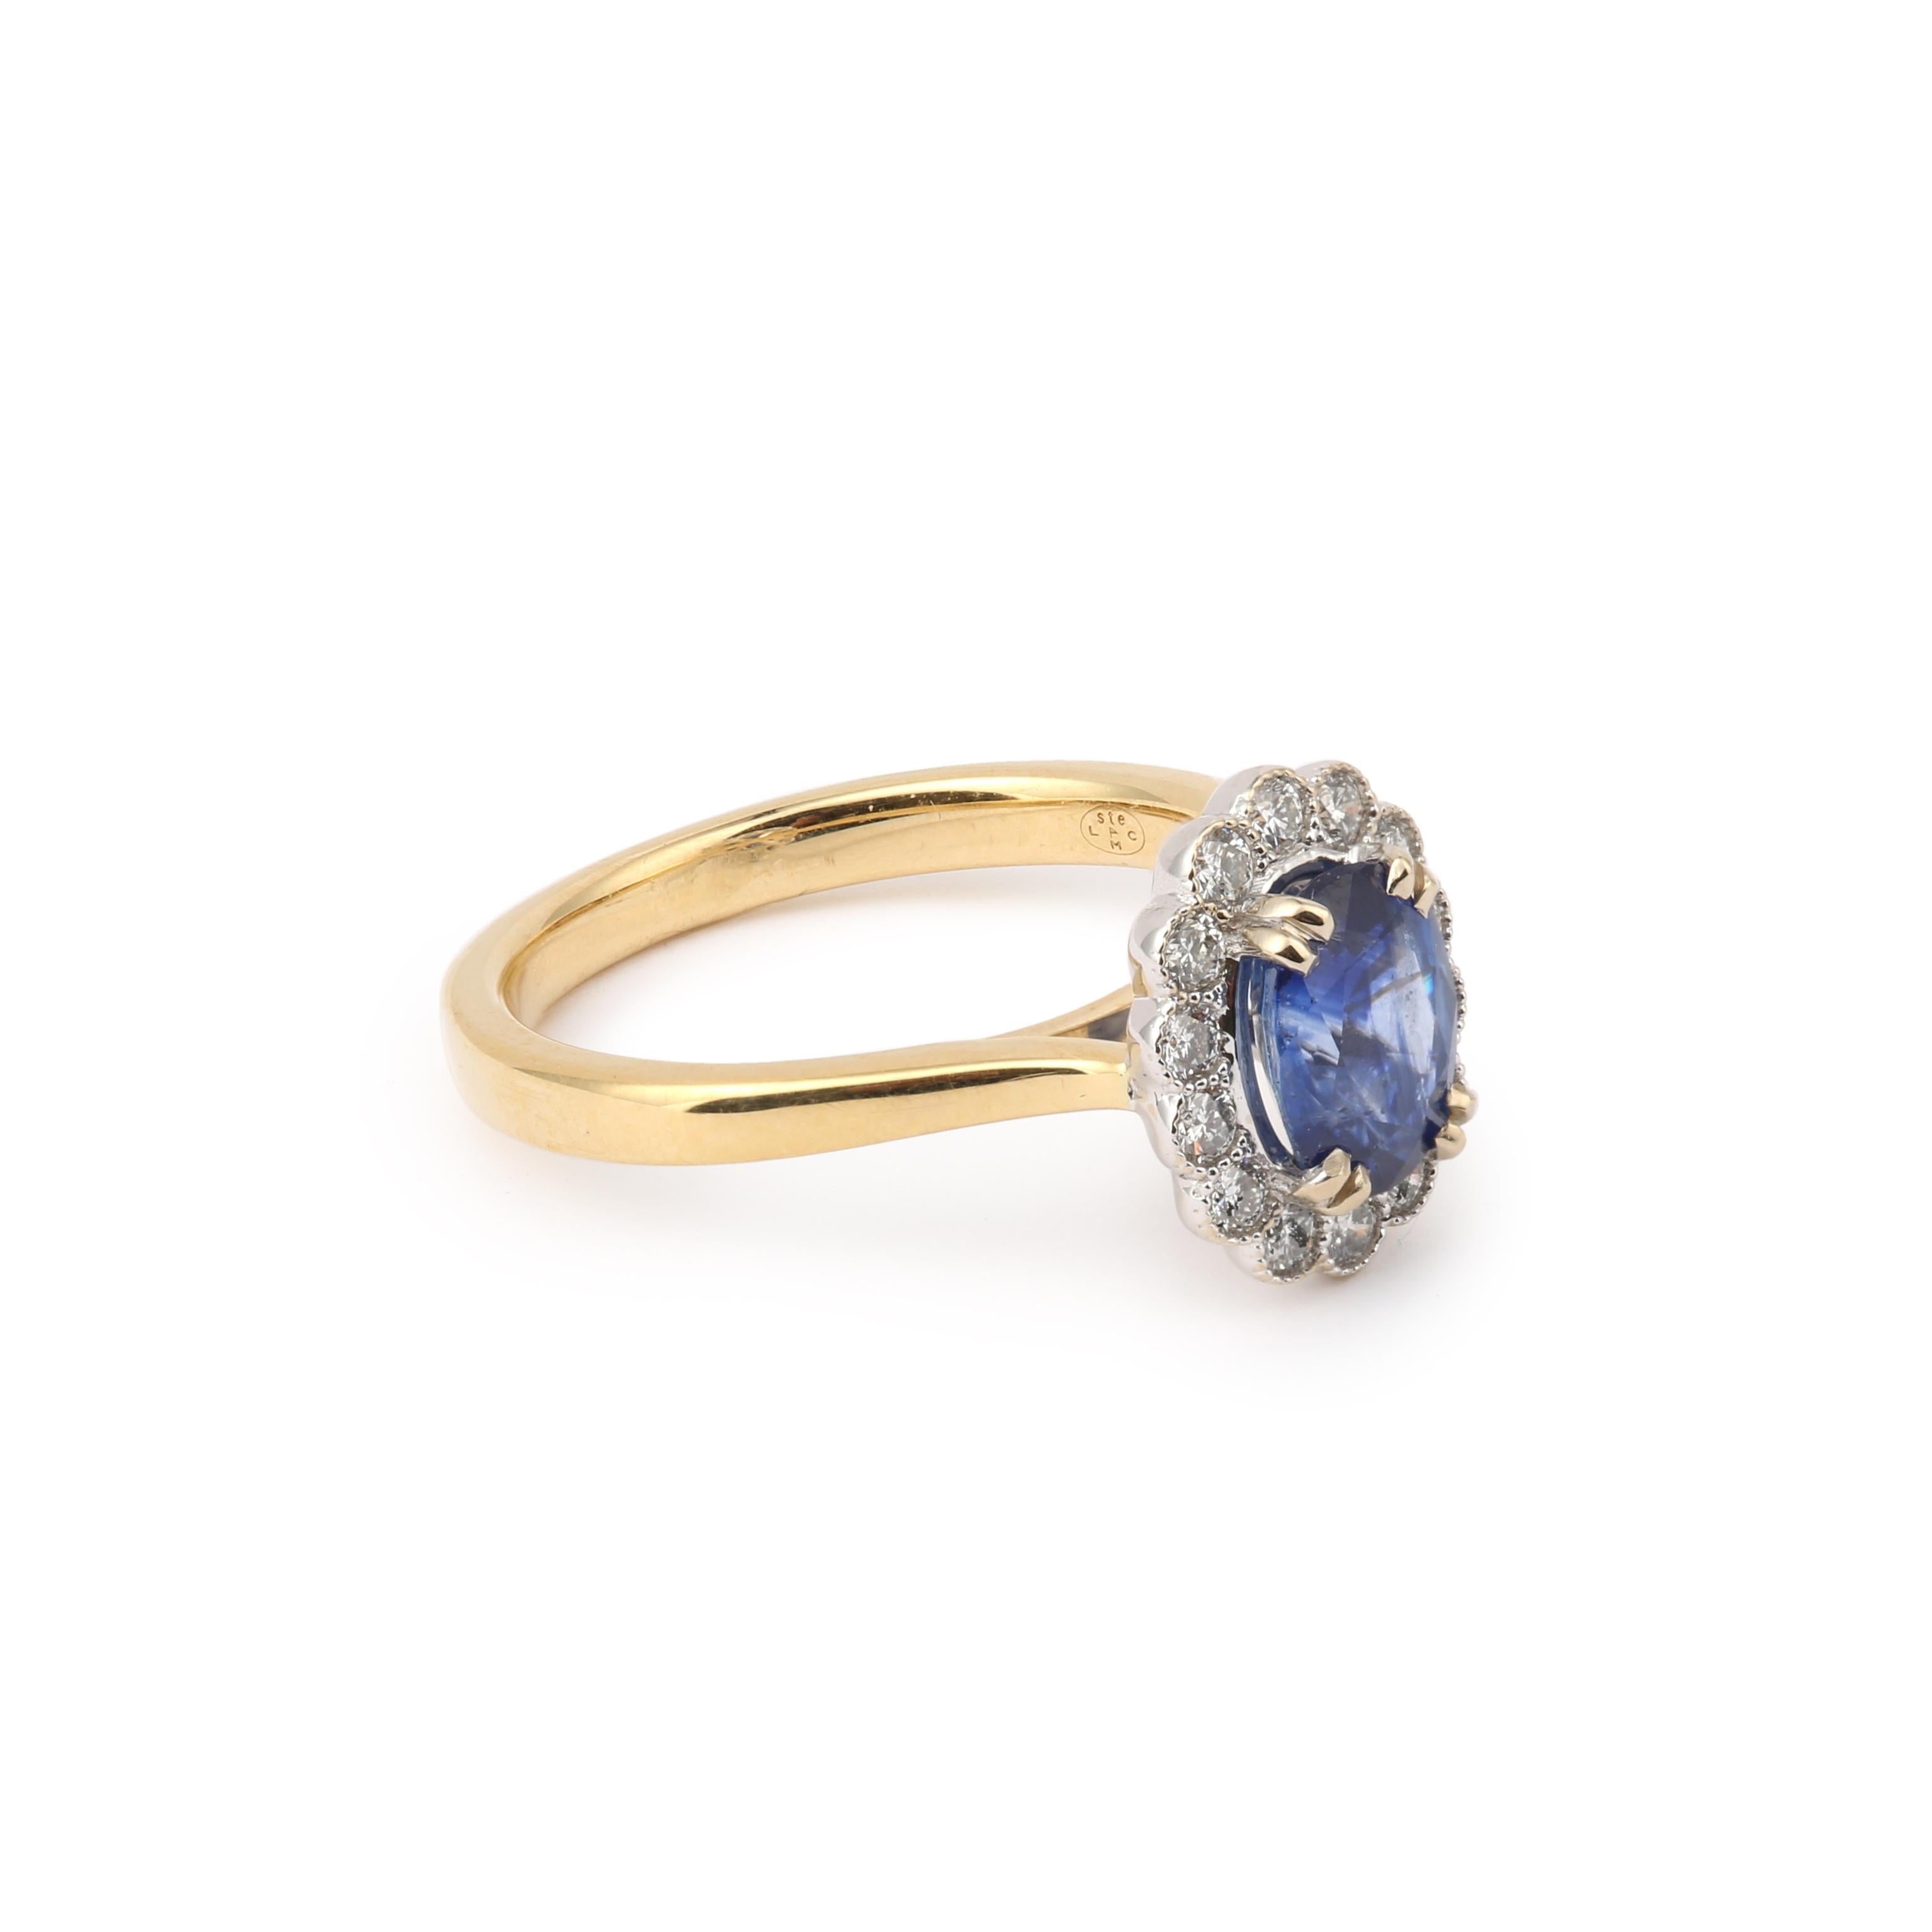 Yellow gold pompadour ring set with an oval-cut sapphire in a diamond setting.

Weight of the sapphire : 1.44 carats

Total weight of diamonds: 0.30 carats

Dimensions: 11.95 x 10 x 7.38 mm (0.470 x 0.393 x 0.290 inch)

Finger size : 53 (US : 6